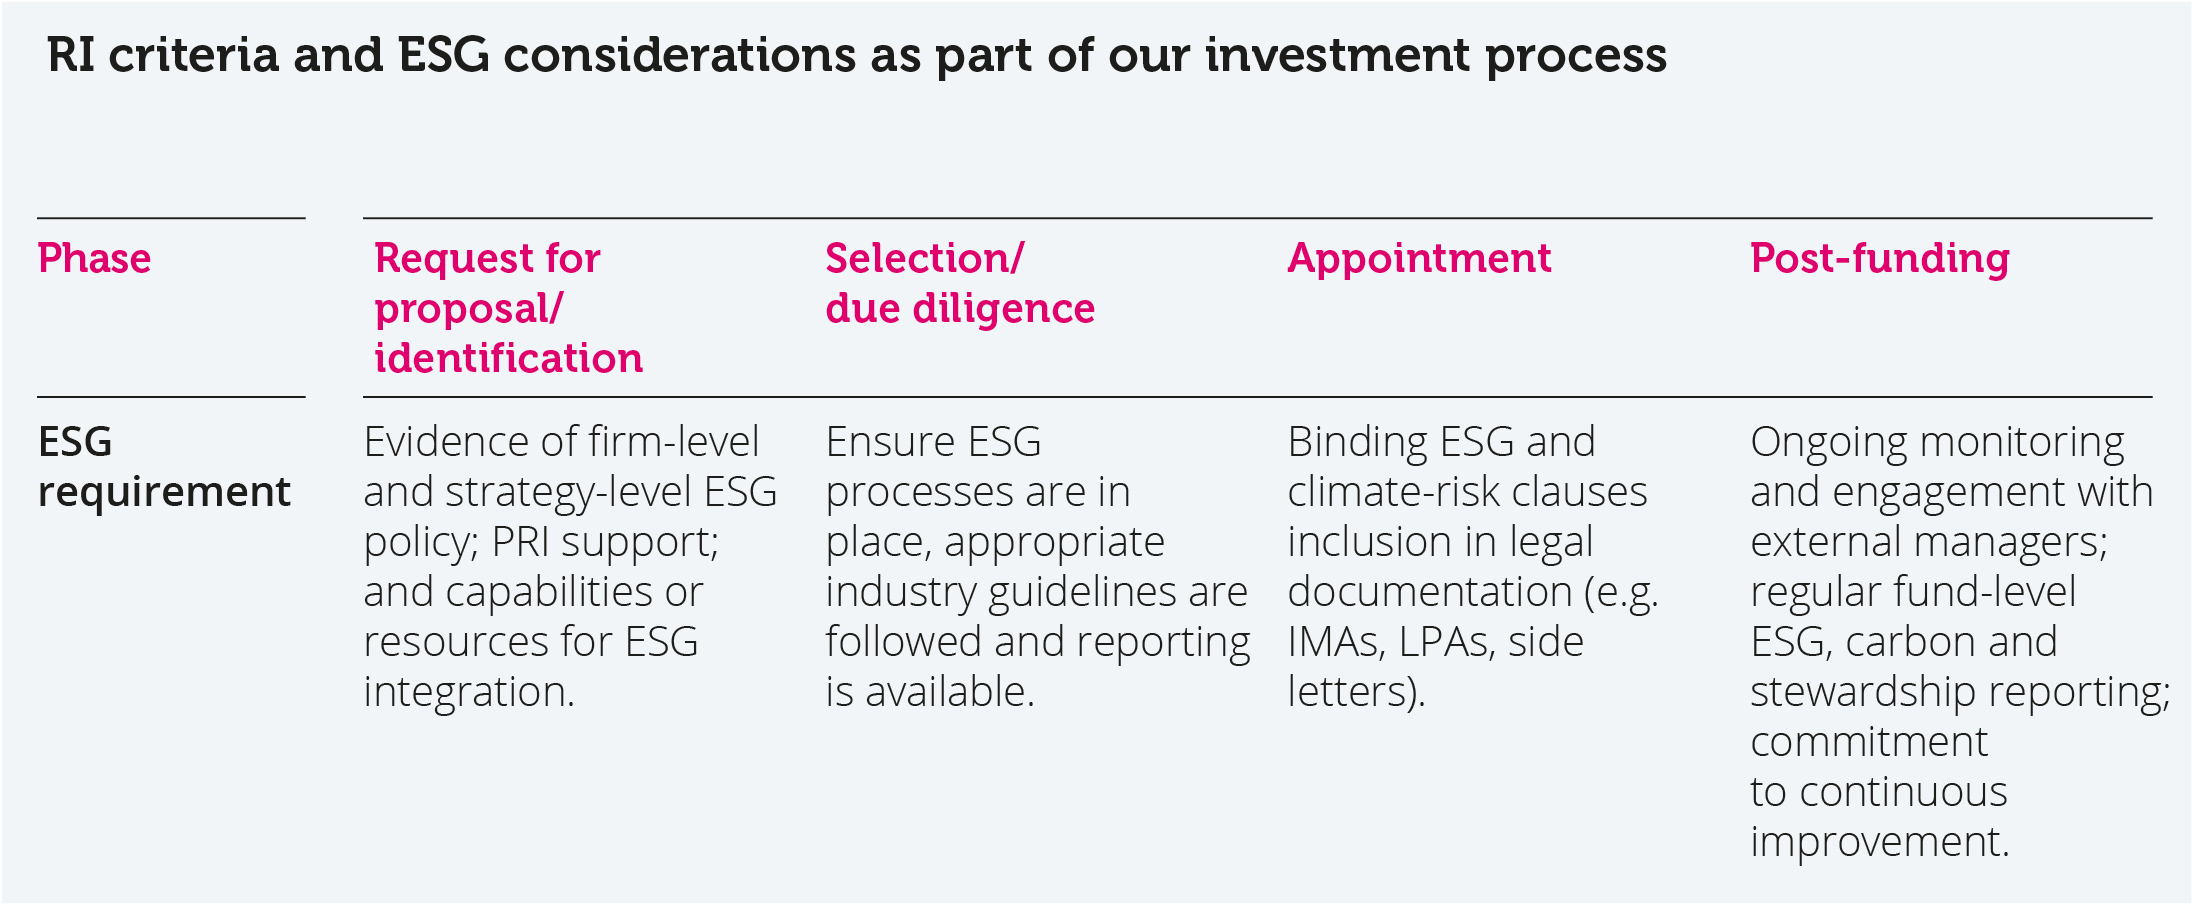 RI criteria and ESG considerations as part of our investment process